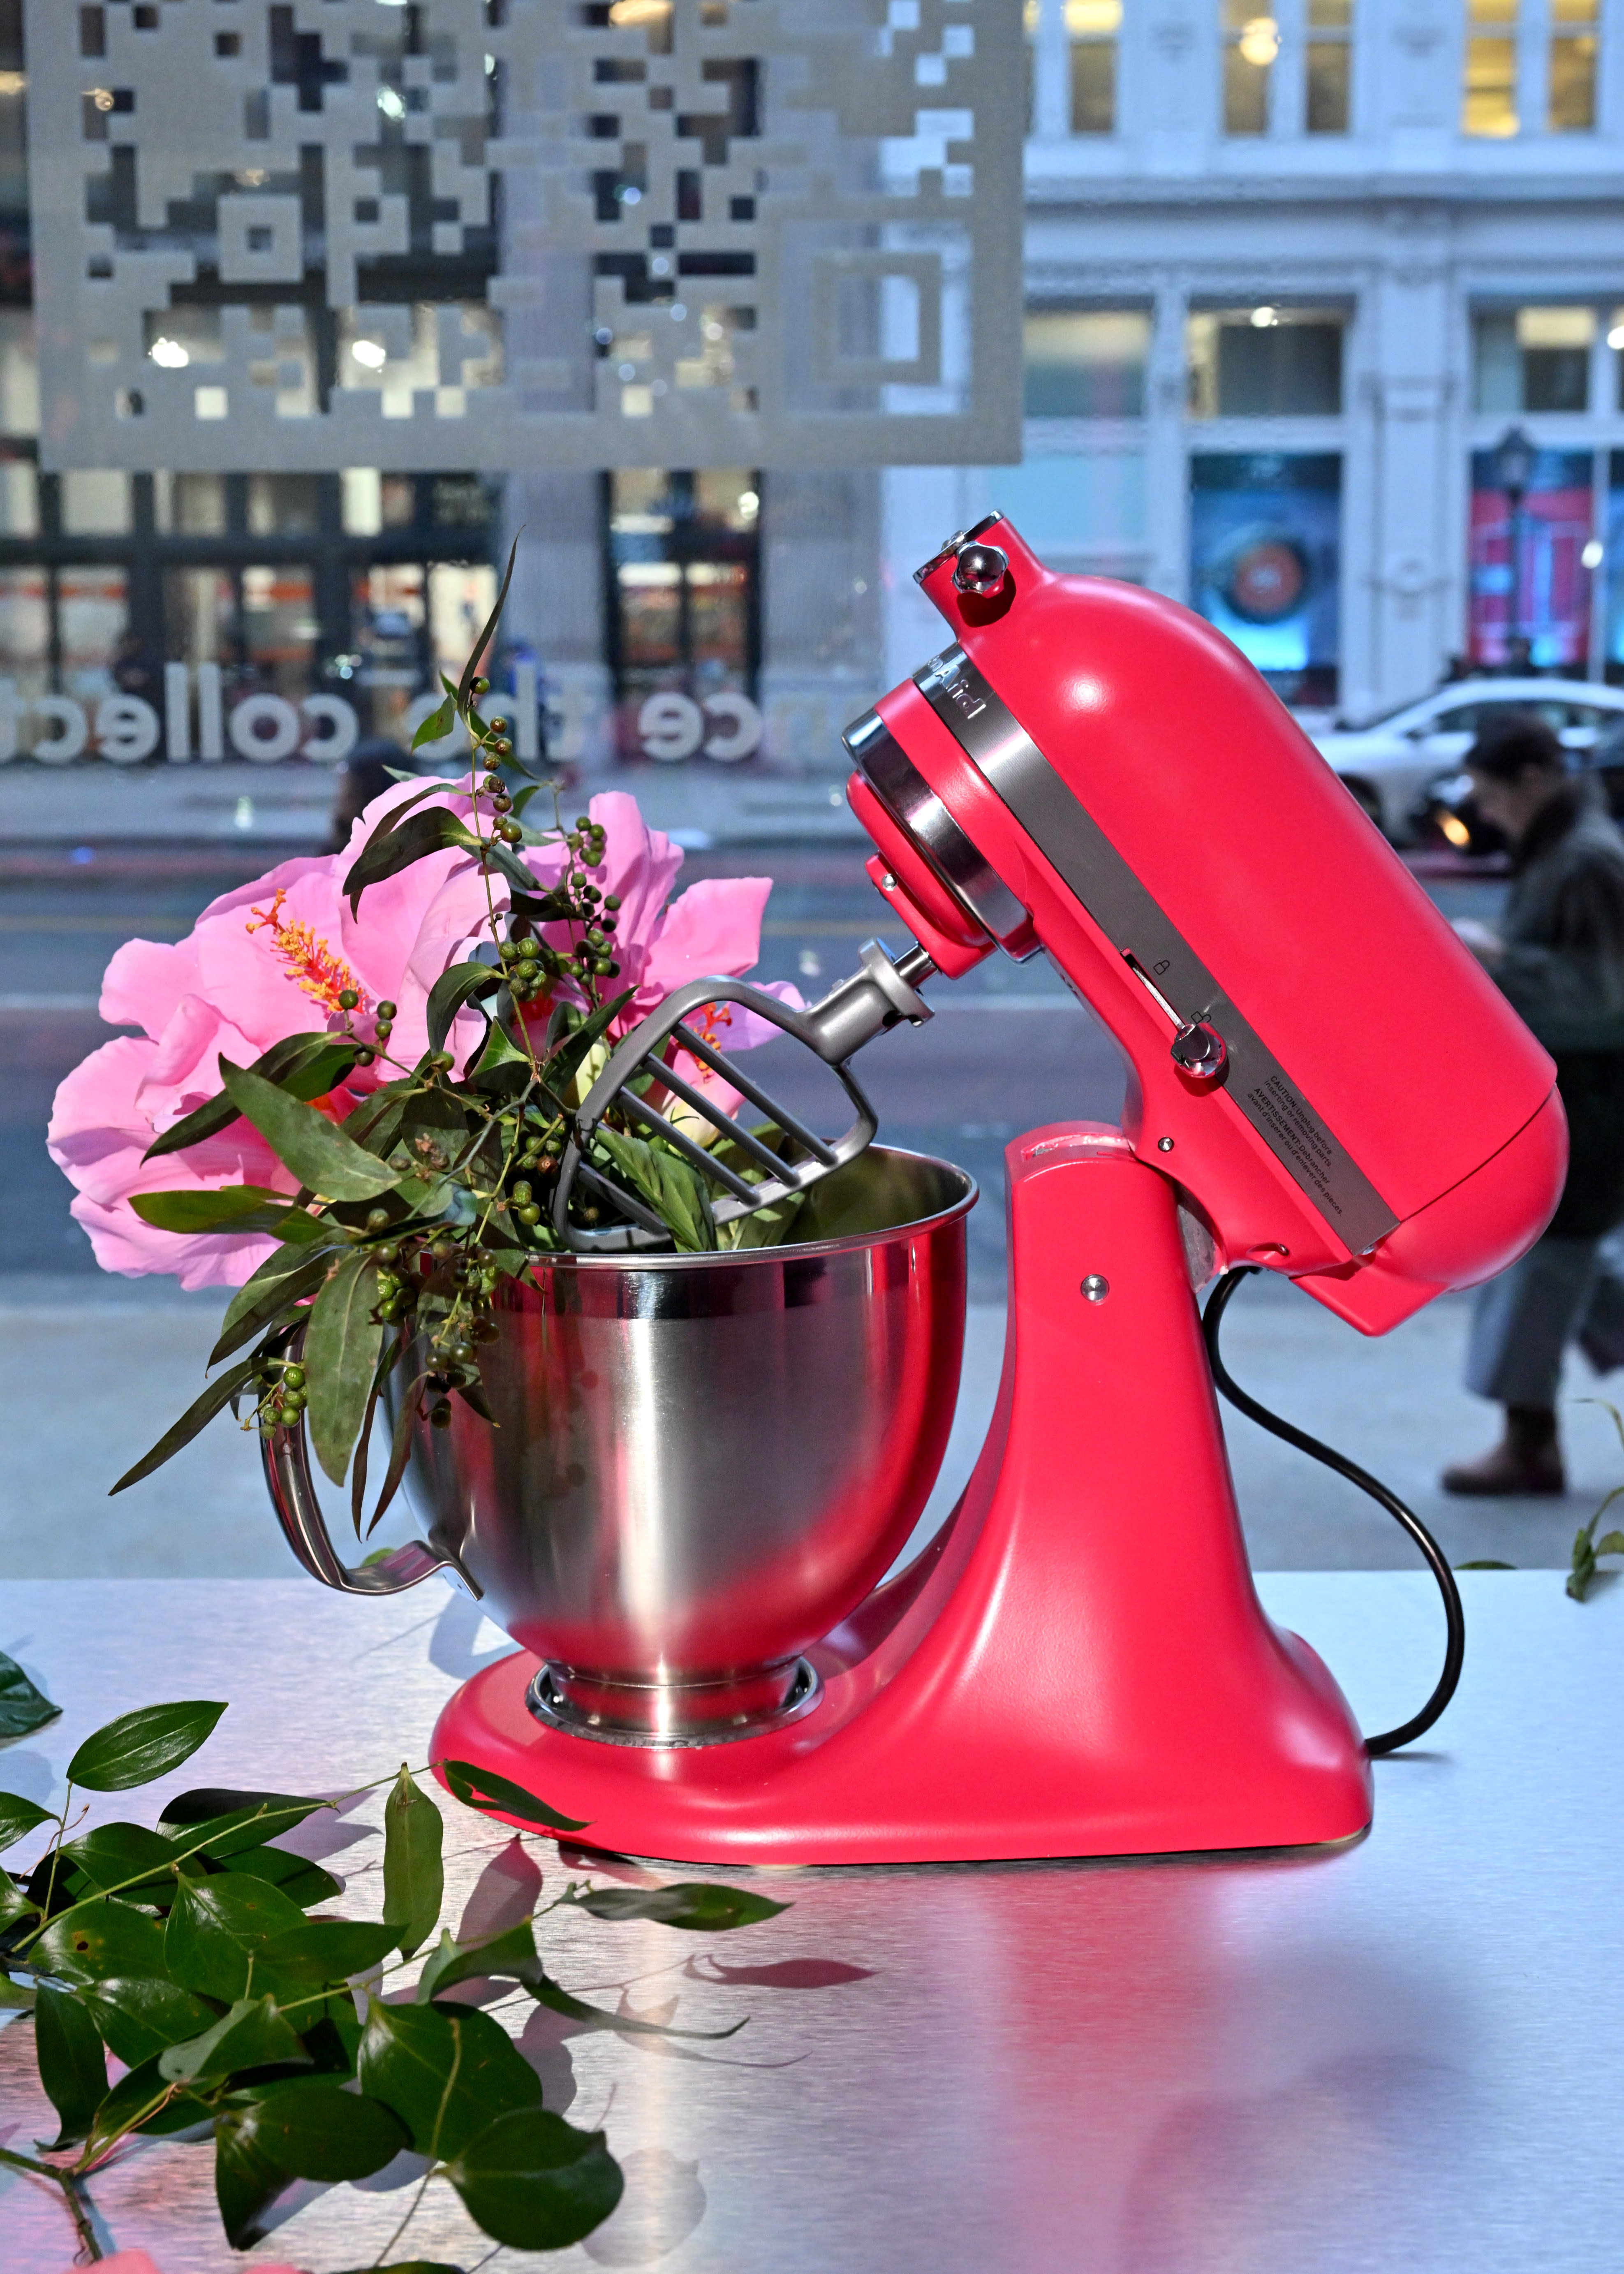 kitchenaid publicity event is pictured here